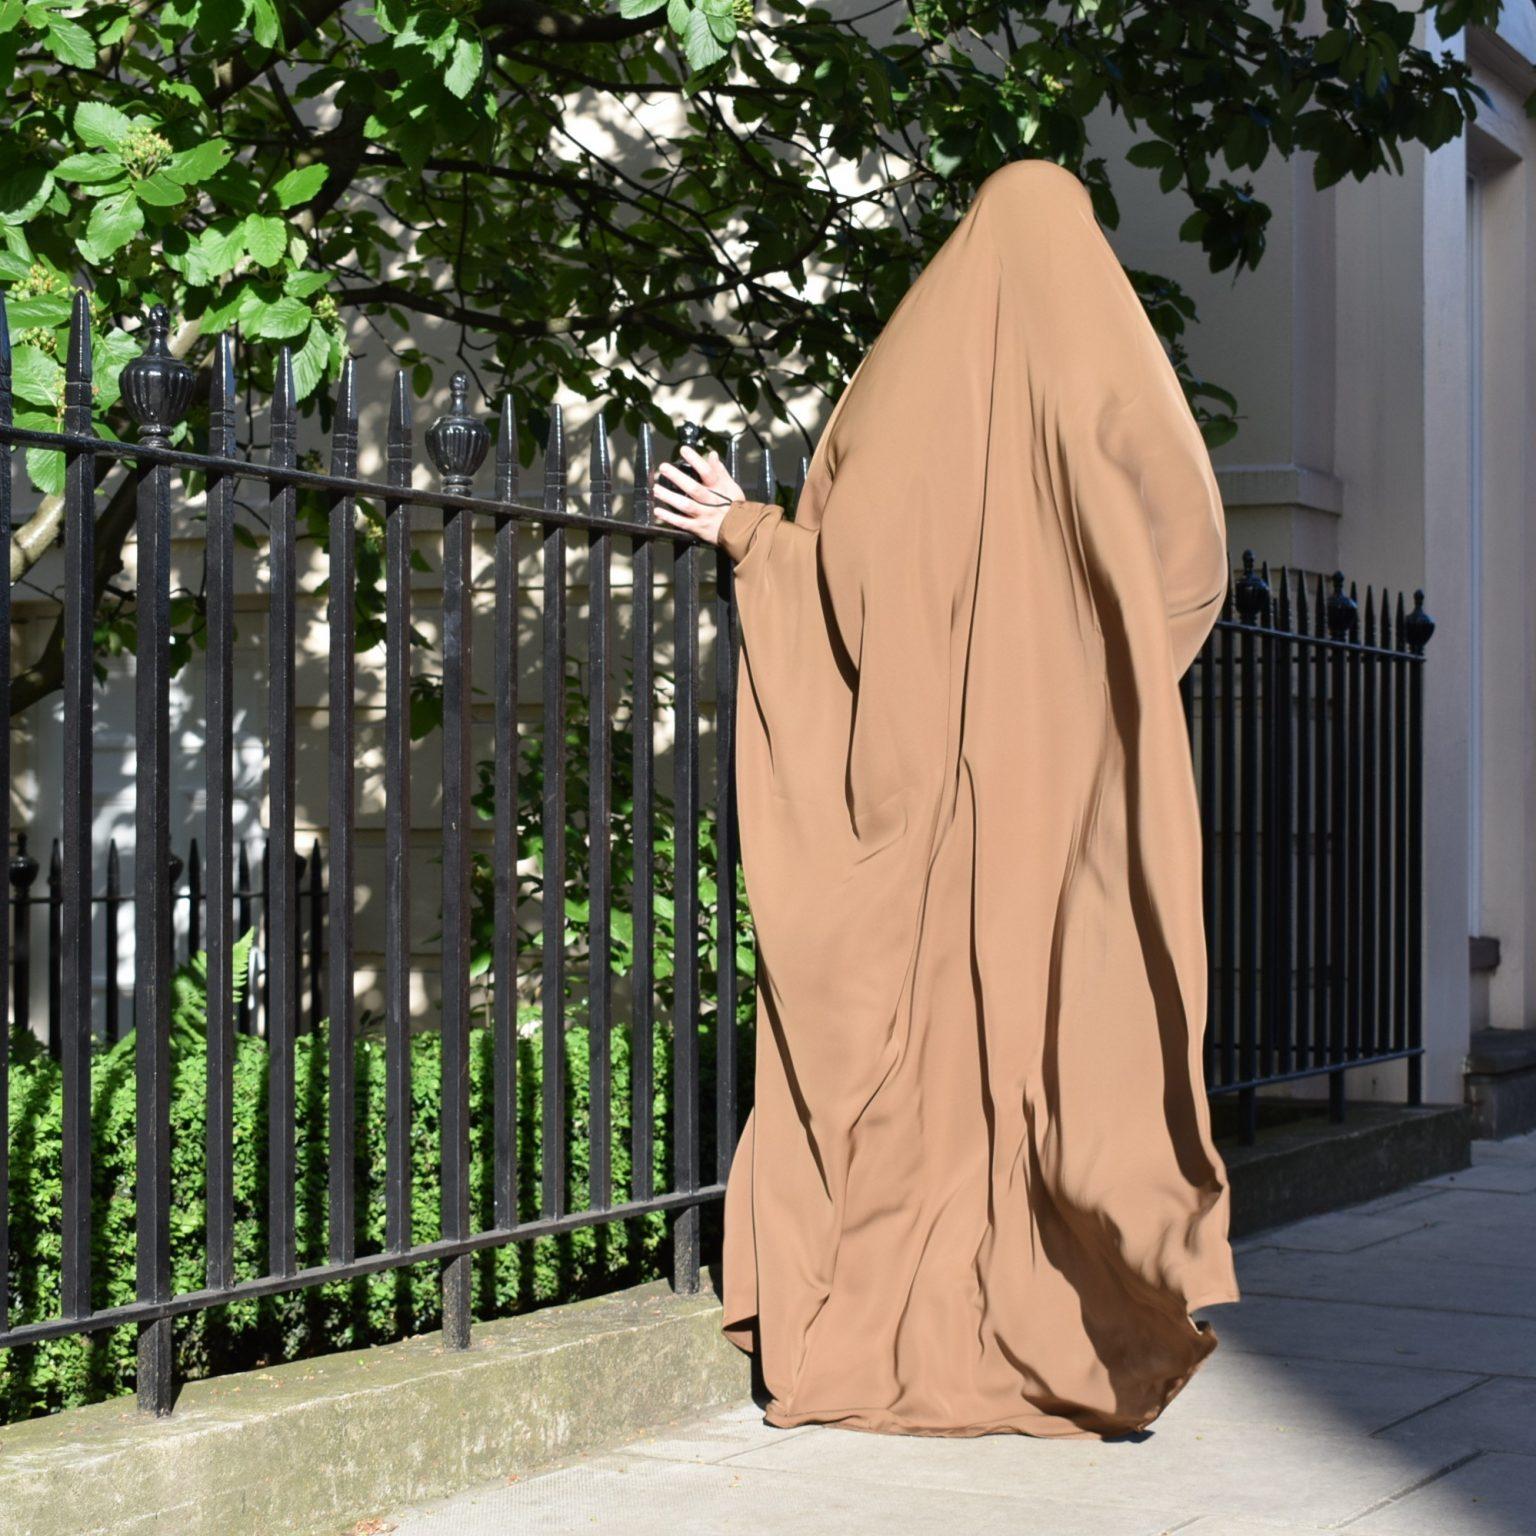 Colour photograph of woman wearing a jilbab in a natural brown tone. The photograph is taken from behind her and she is walking away from the camera along a London street, with wrought iron railings next to her.